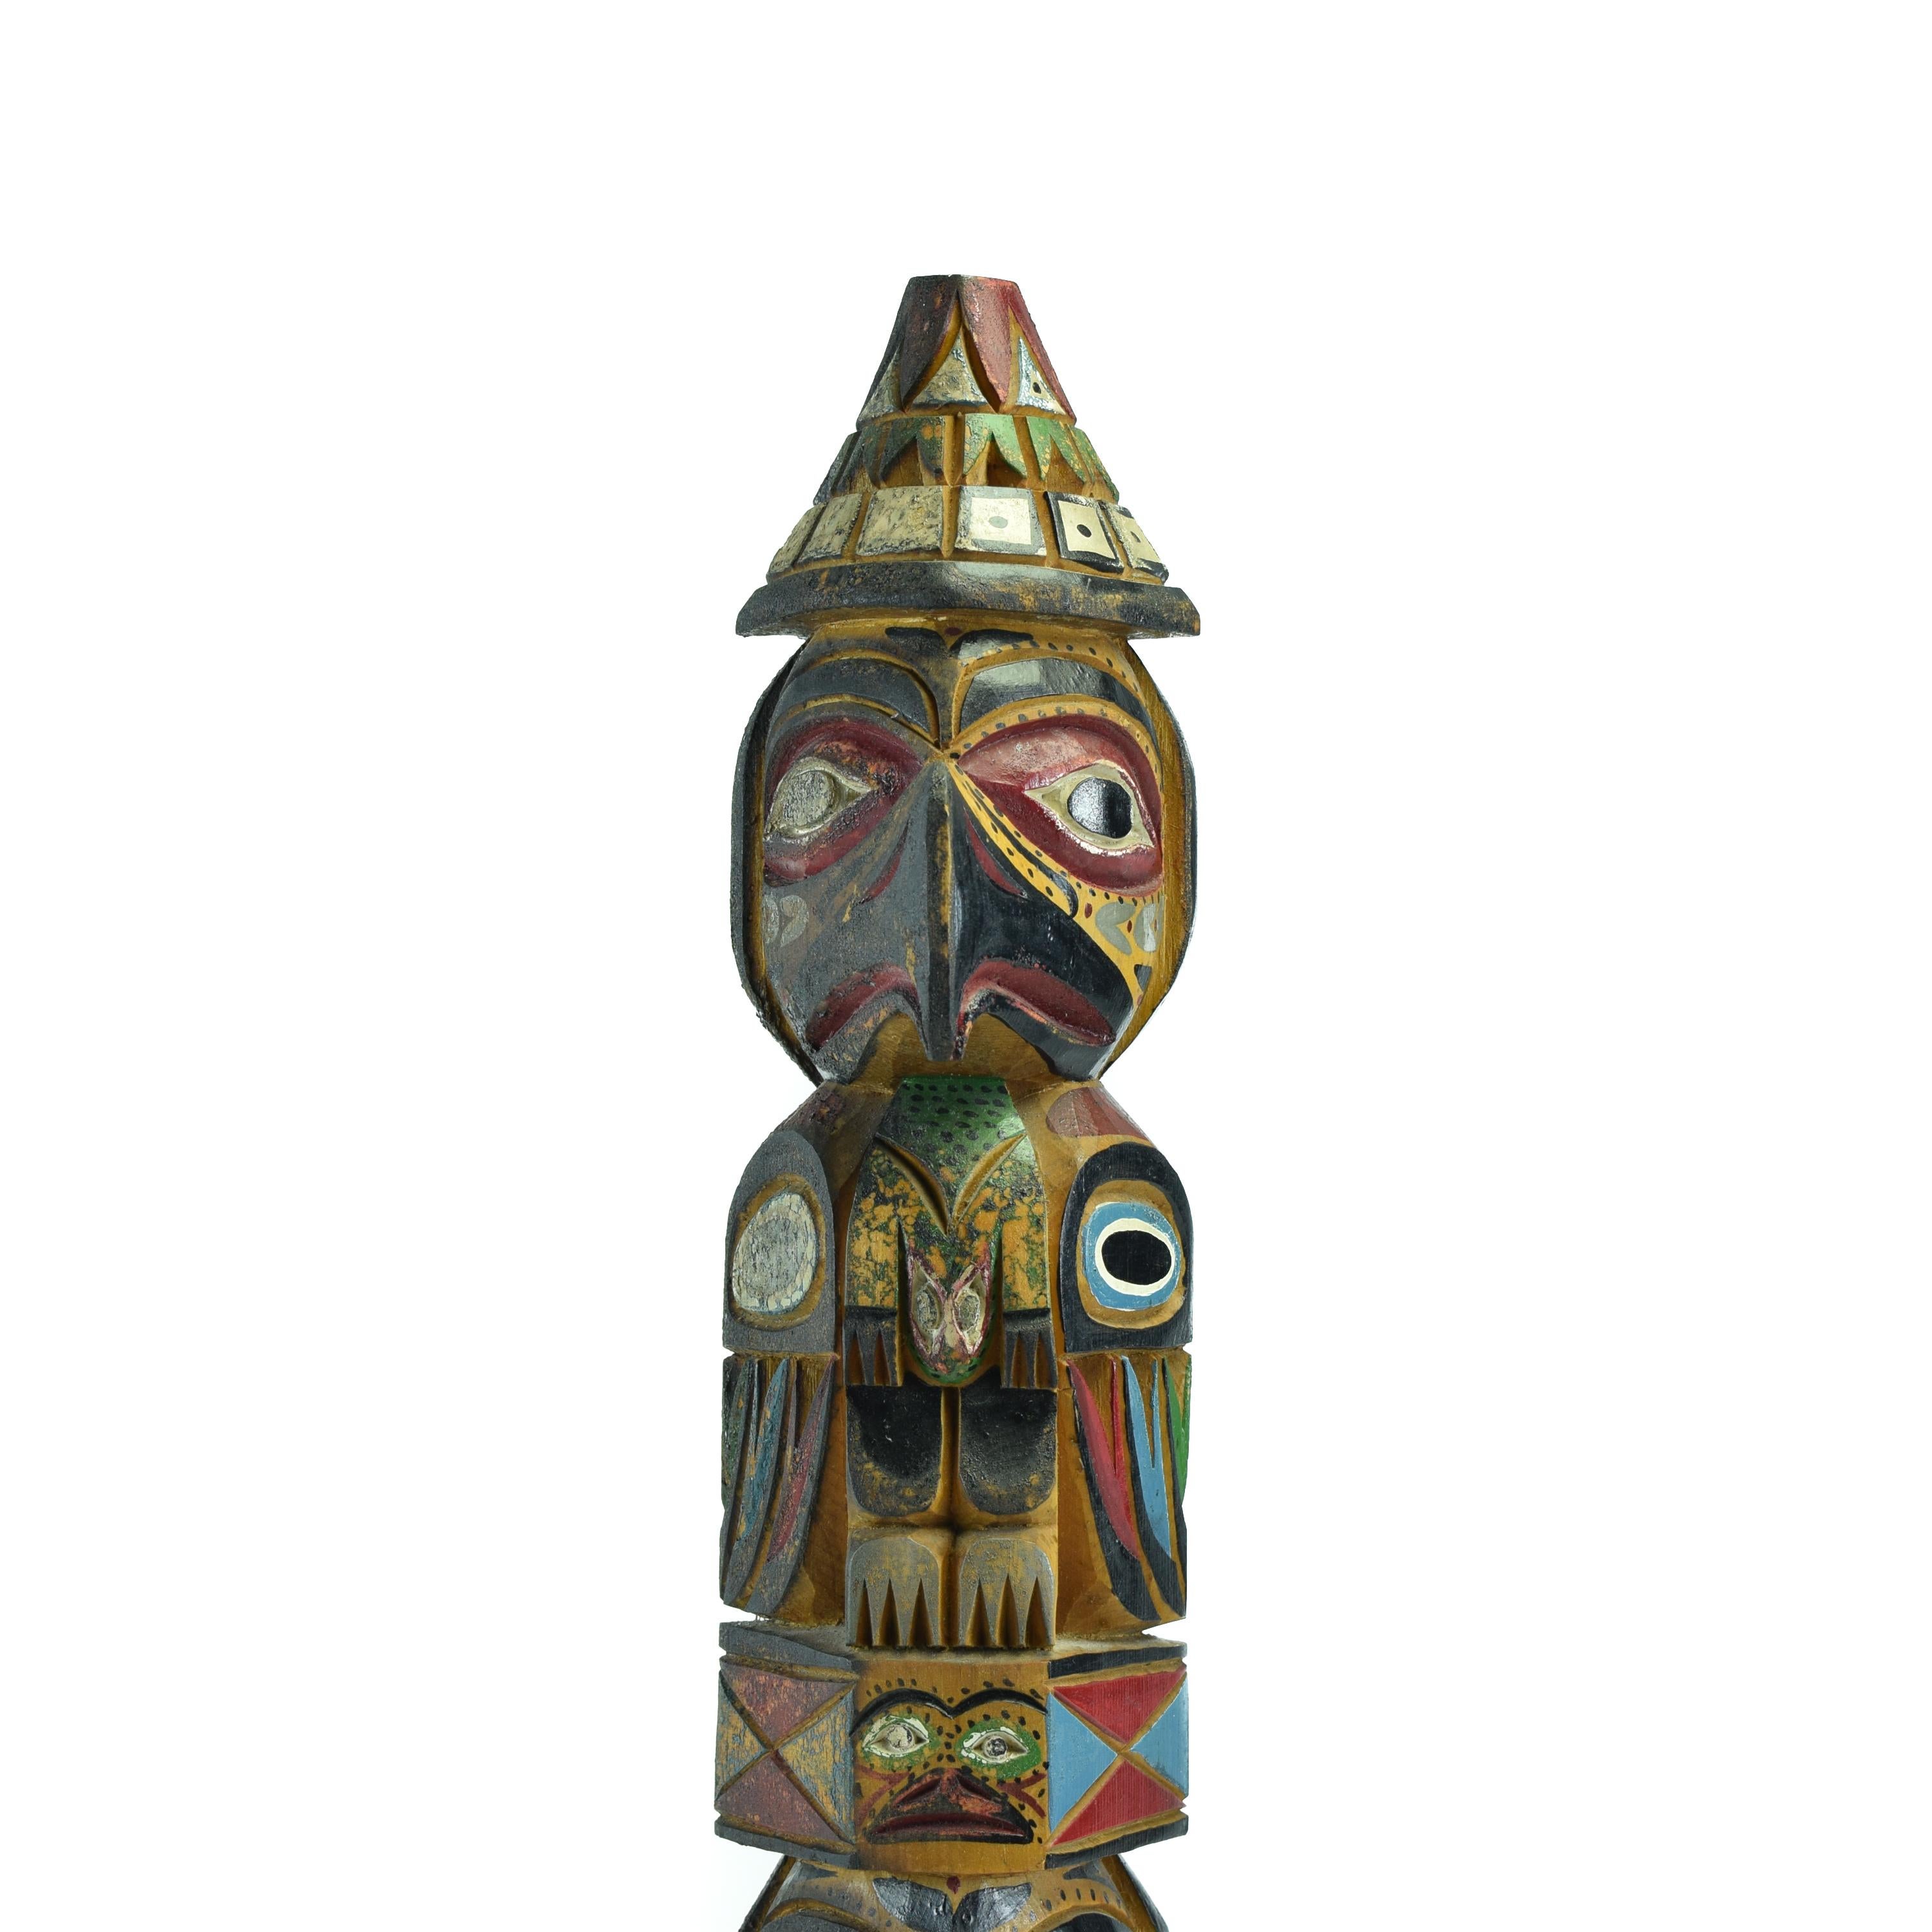 American Ditidaht/Nuu-Chah-Nulth Totem By Raymond Williams For Sale